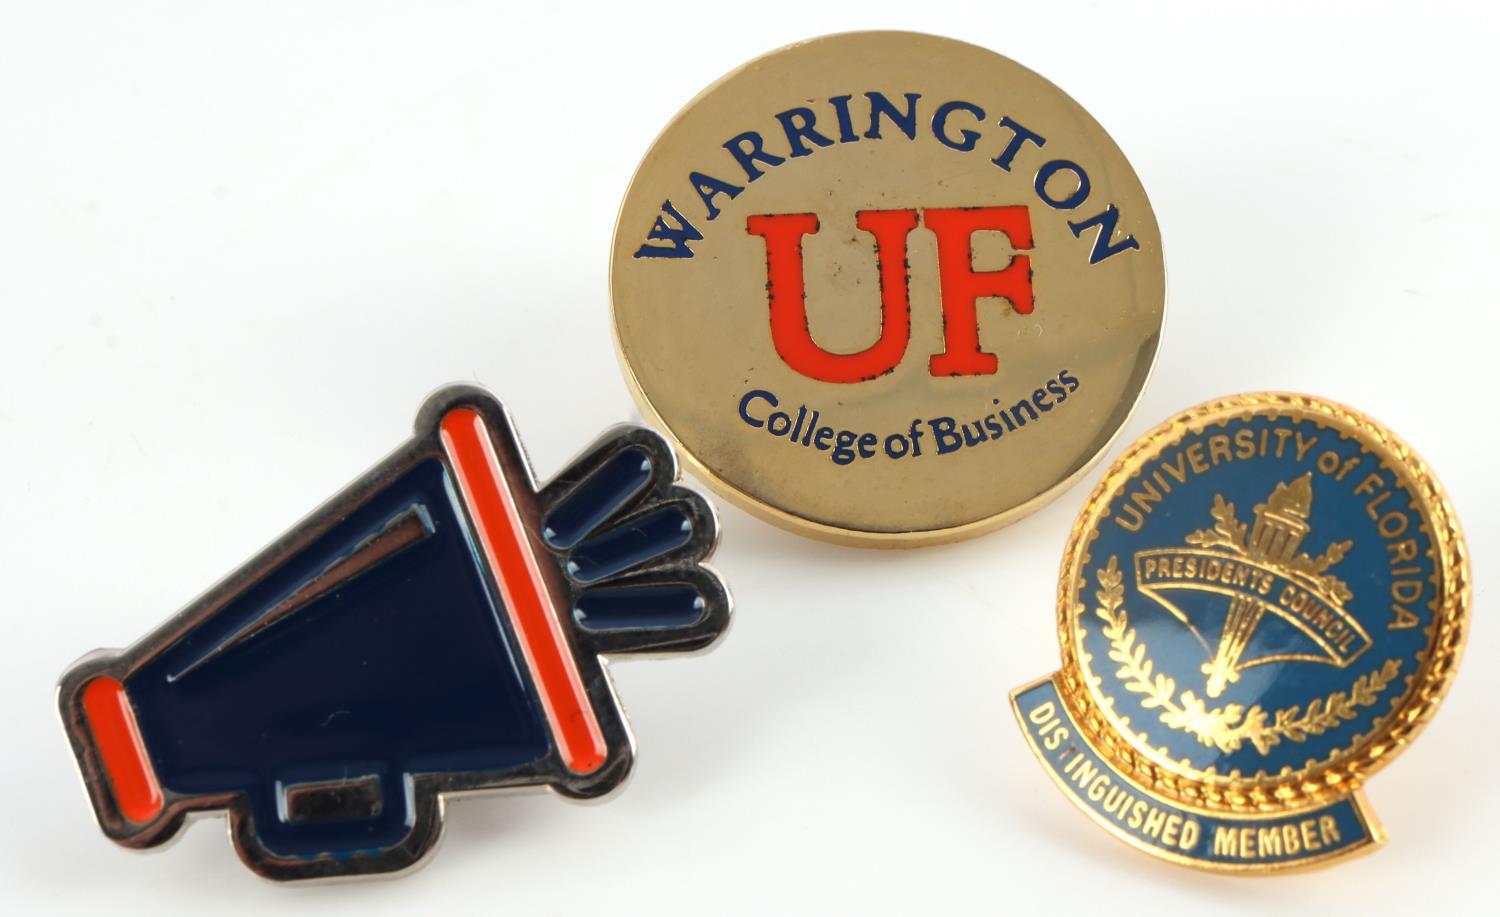 UNIVERSITY OF FLORIDA BOOK WATCH AND LAPEL PINS